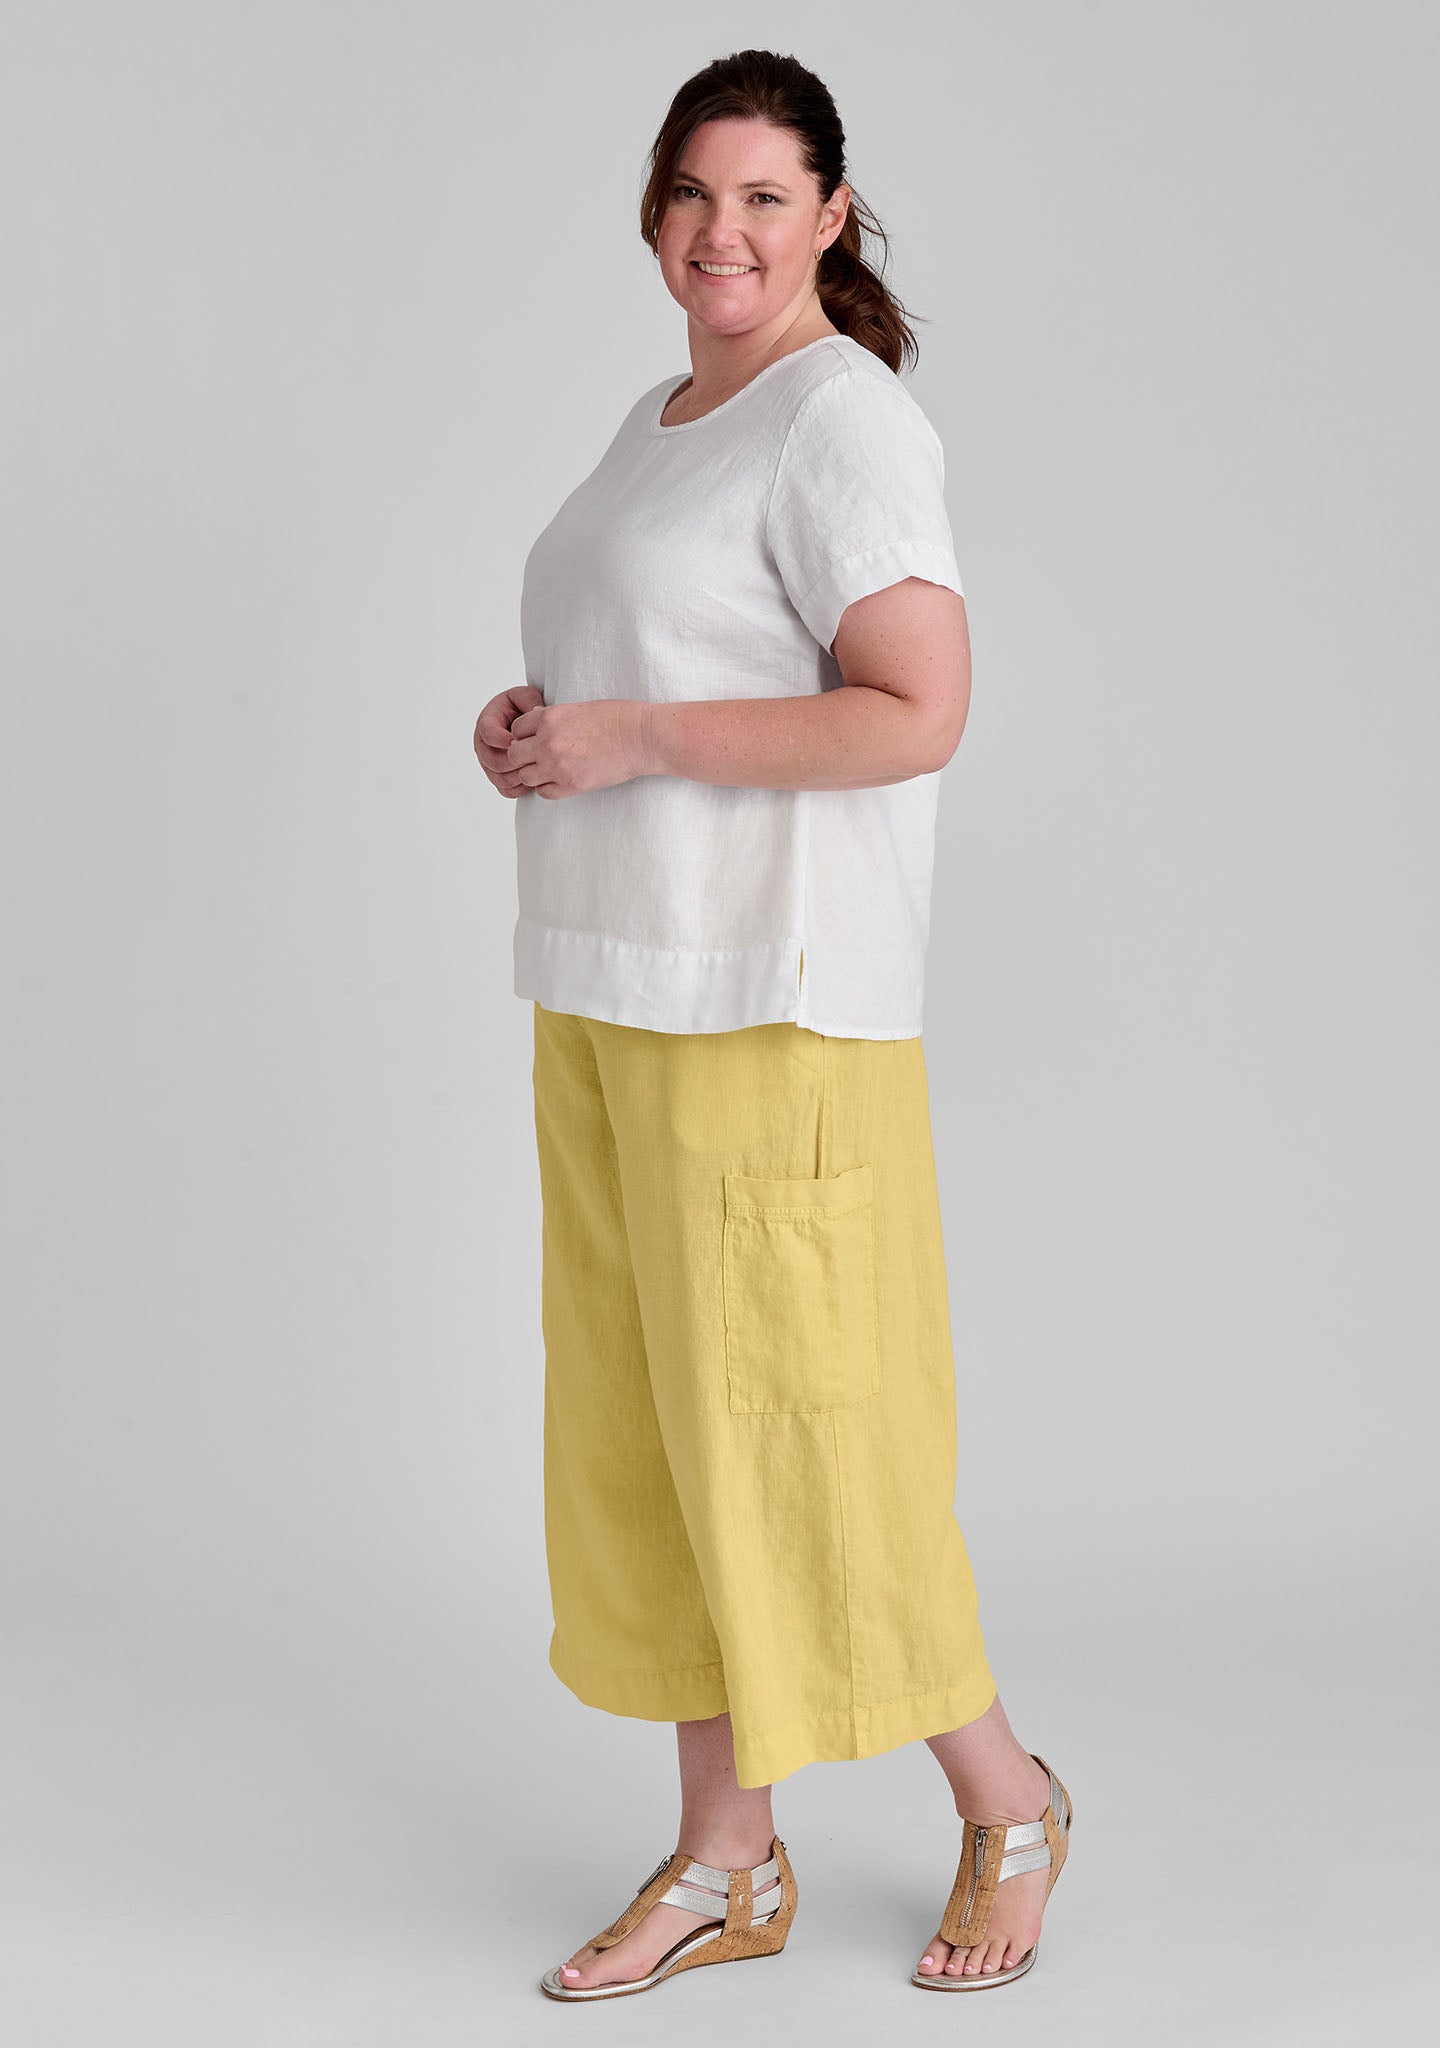 FLAX linen shirt in white with linen pants in yellow